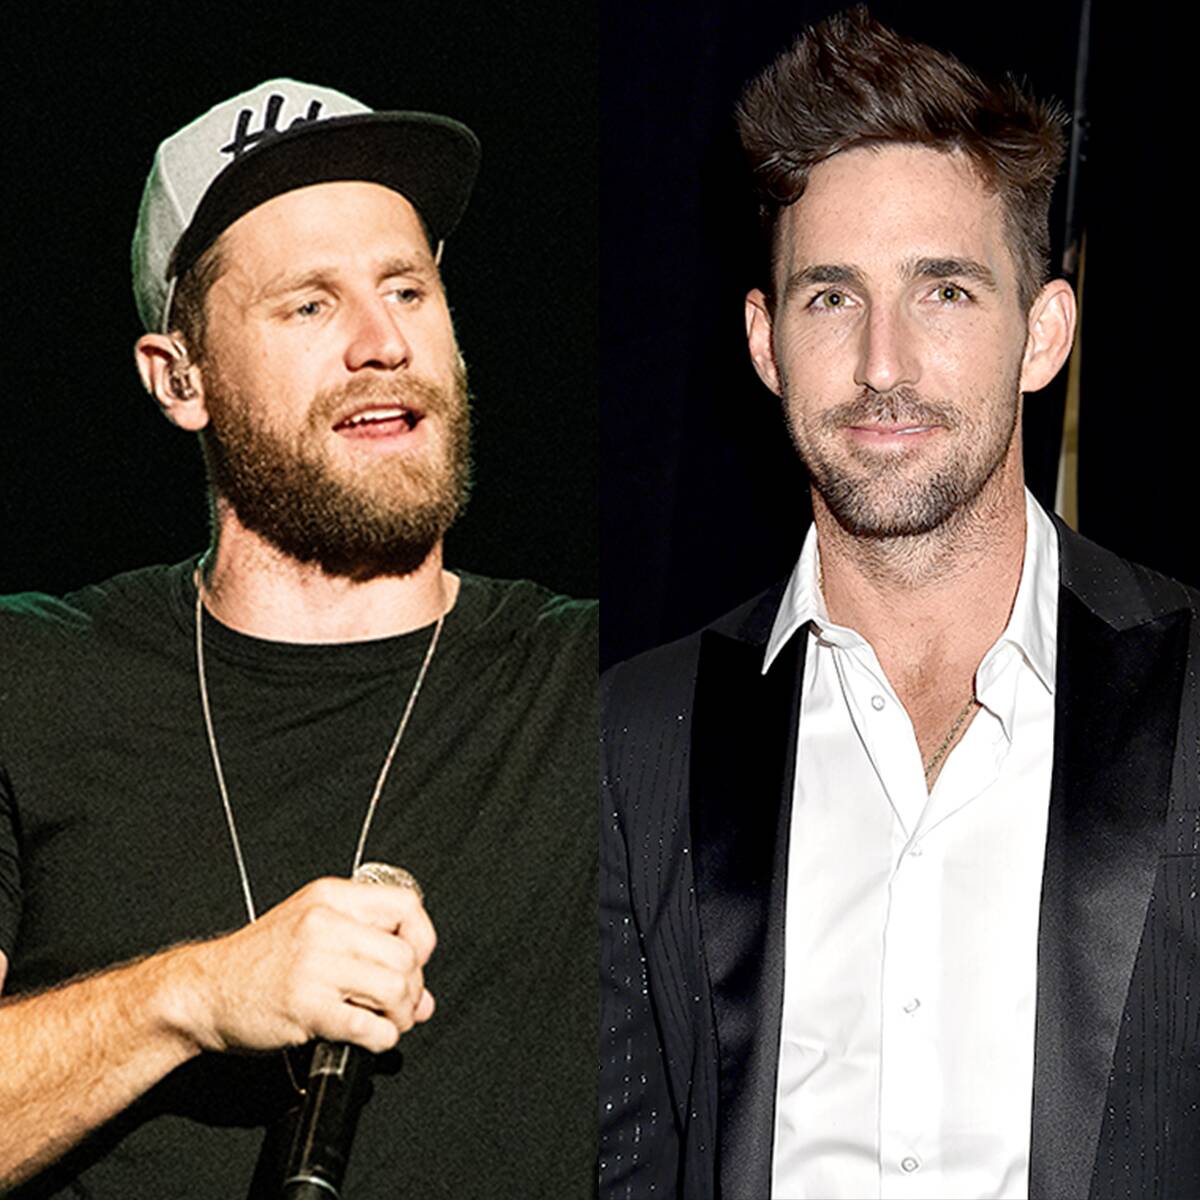 Jake Owen Defends Chase Rice After Playing Concert During Coronavirus Concerns